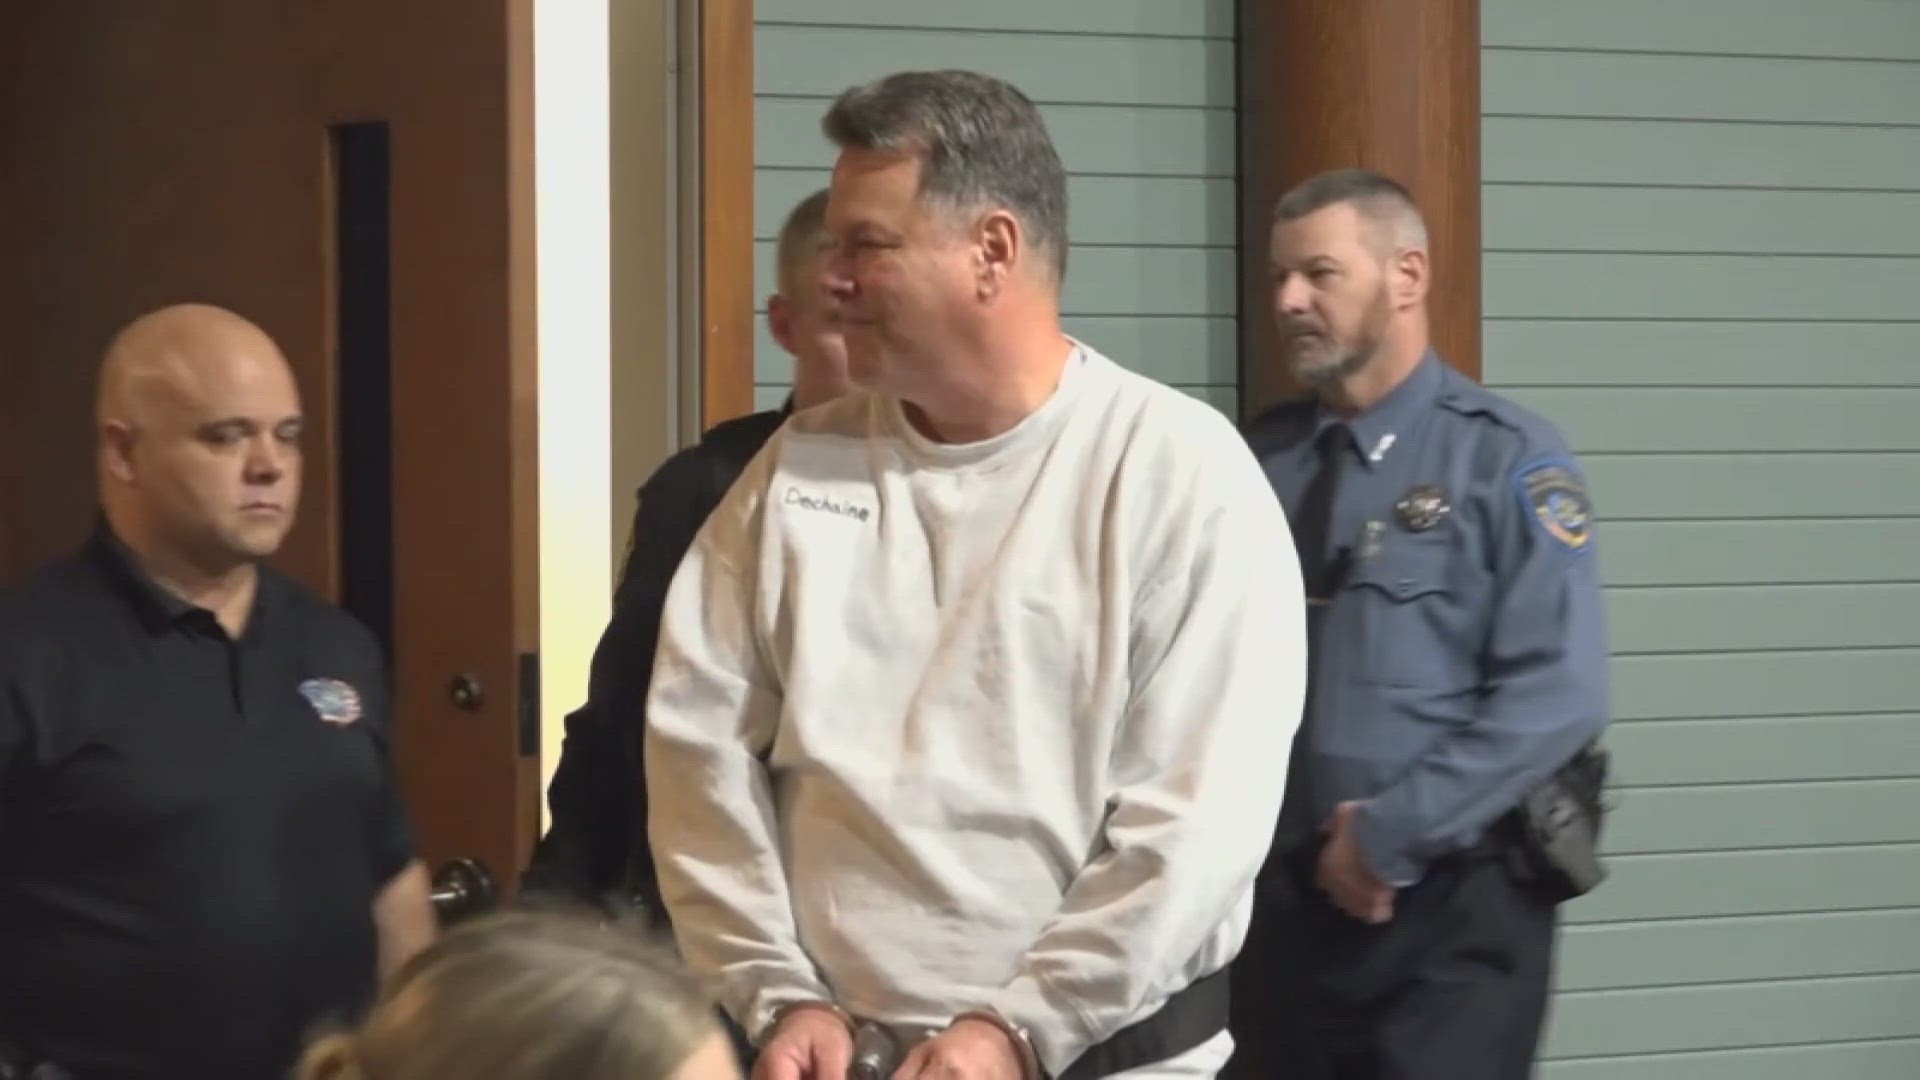 Dennis Dechaine, convicted in 1988 killing of Sarah Cherry in Bowdoin, seeks new trial